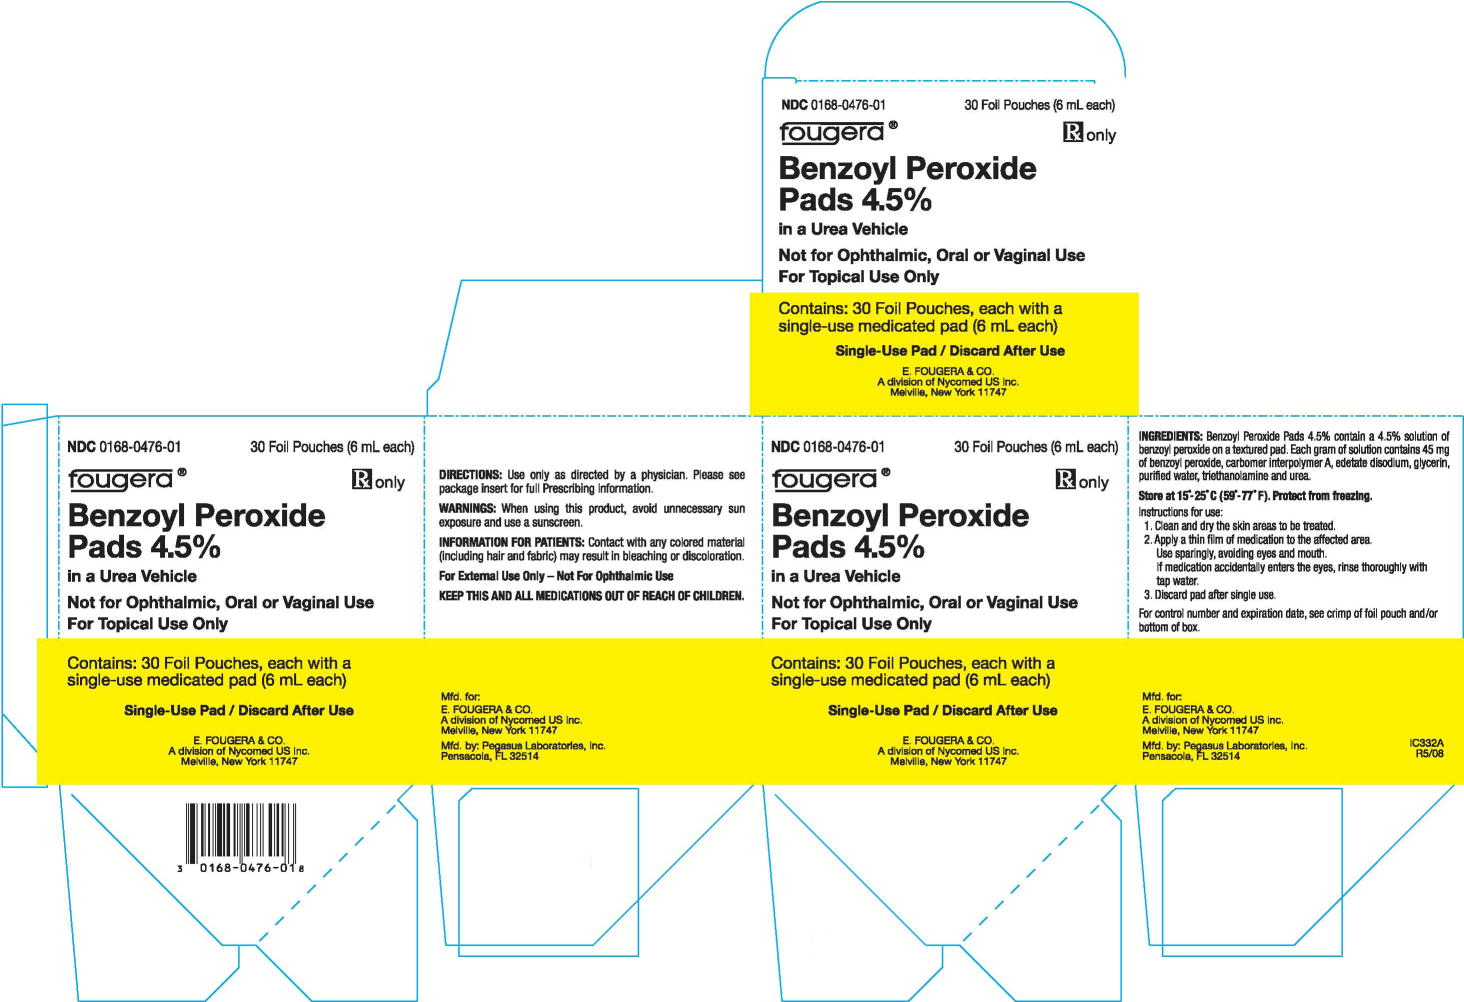 BENZOYL PEROXIDE PADS 4.5% - CARTON OF 30 FOIL POUCHES (6mL each)
